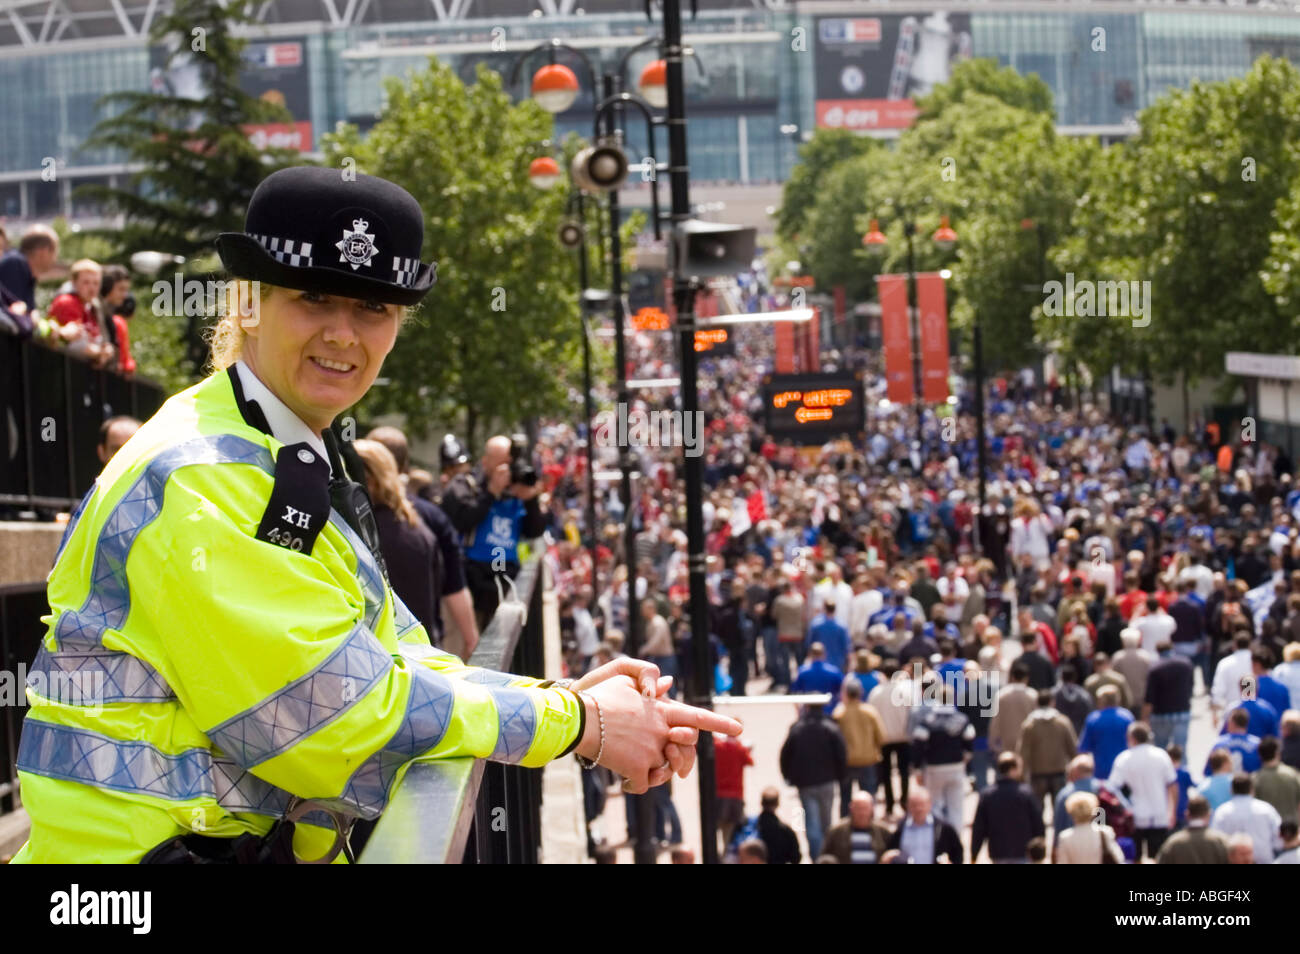 British police is watching over the football supporters They are going to the FA cup final in Wembley stadium Stock Photo